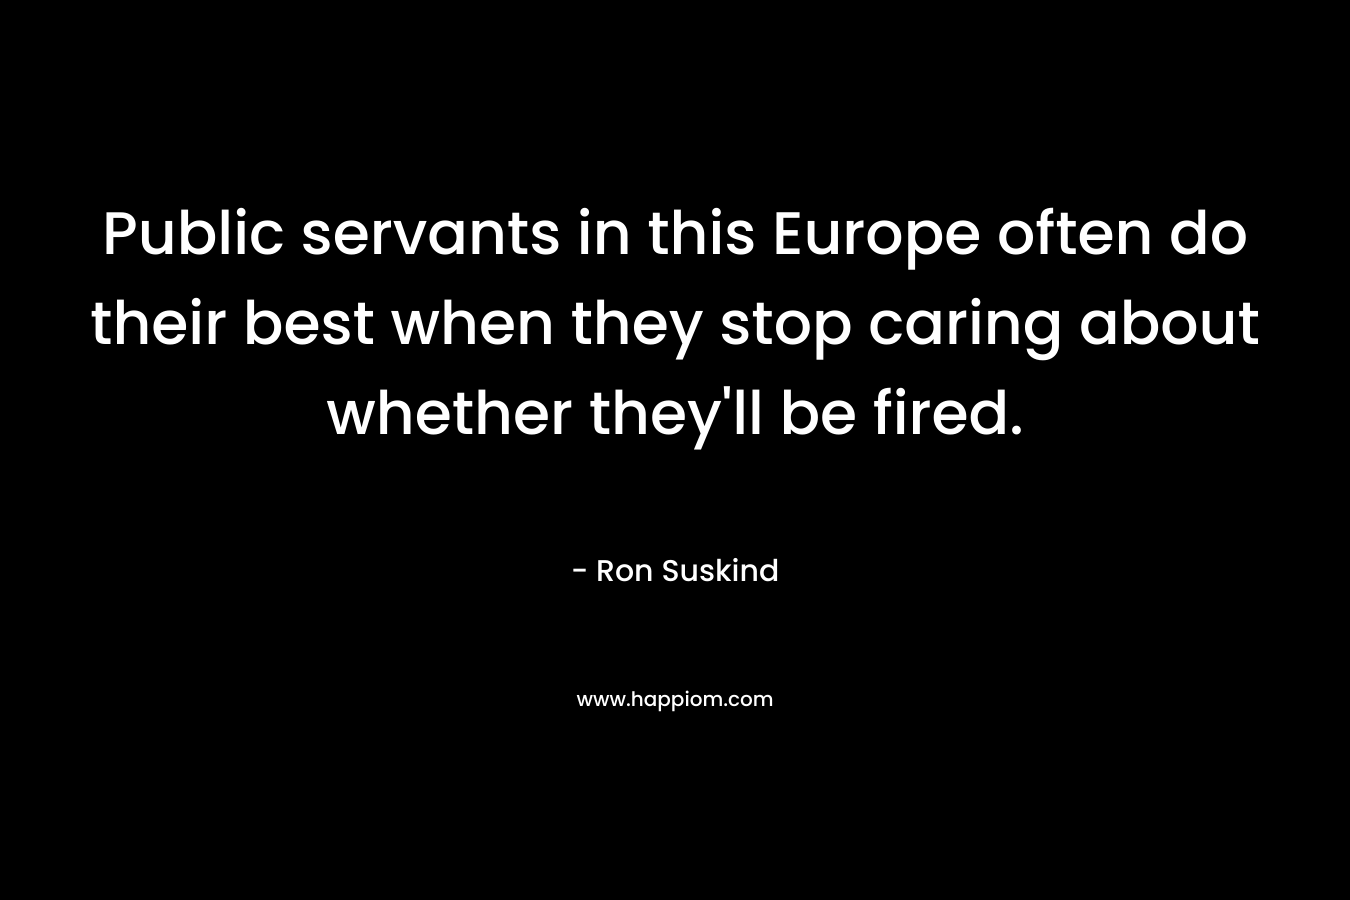 Public servants in this Europe often do their best when they stop caring about whether they’ll be fired. – Ron Suskind